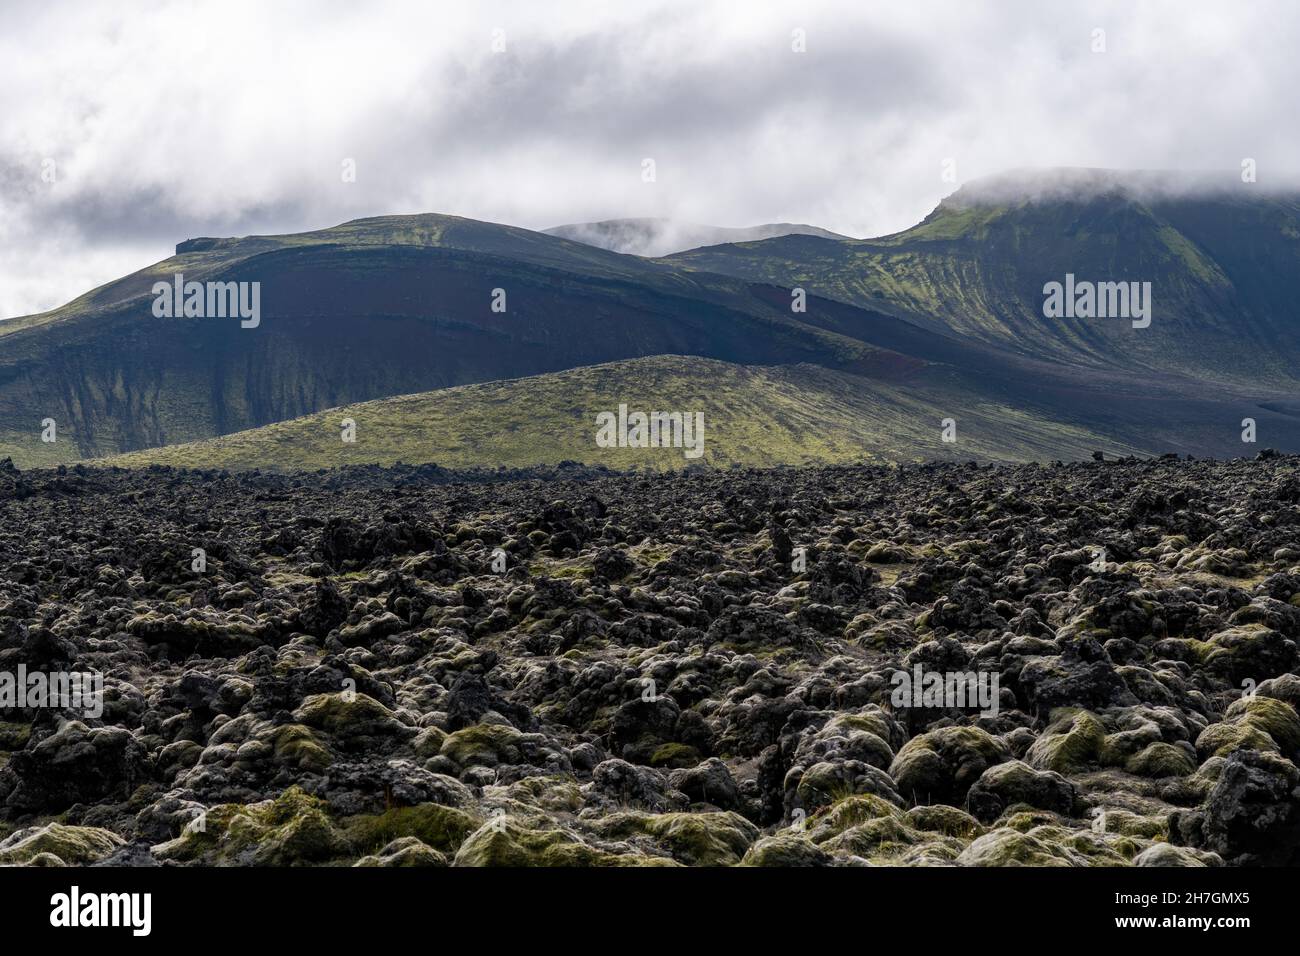 Low angle view of the barren landscape of black lava rock from the nearby Katla volcano on Iceland with mountains in the background Stock Photo